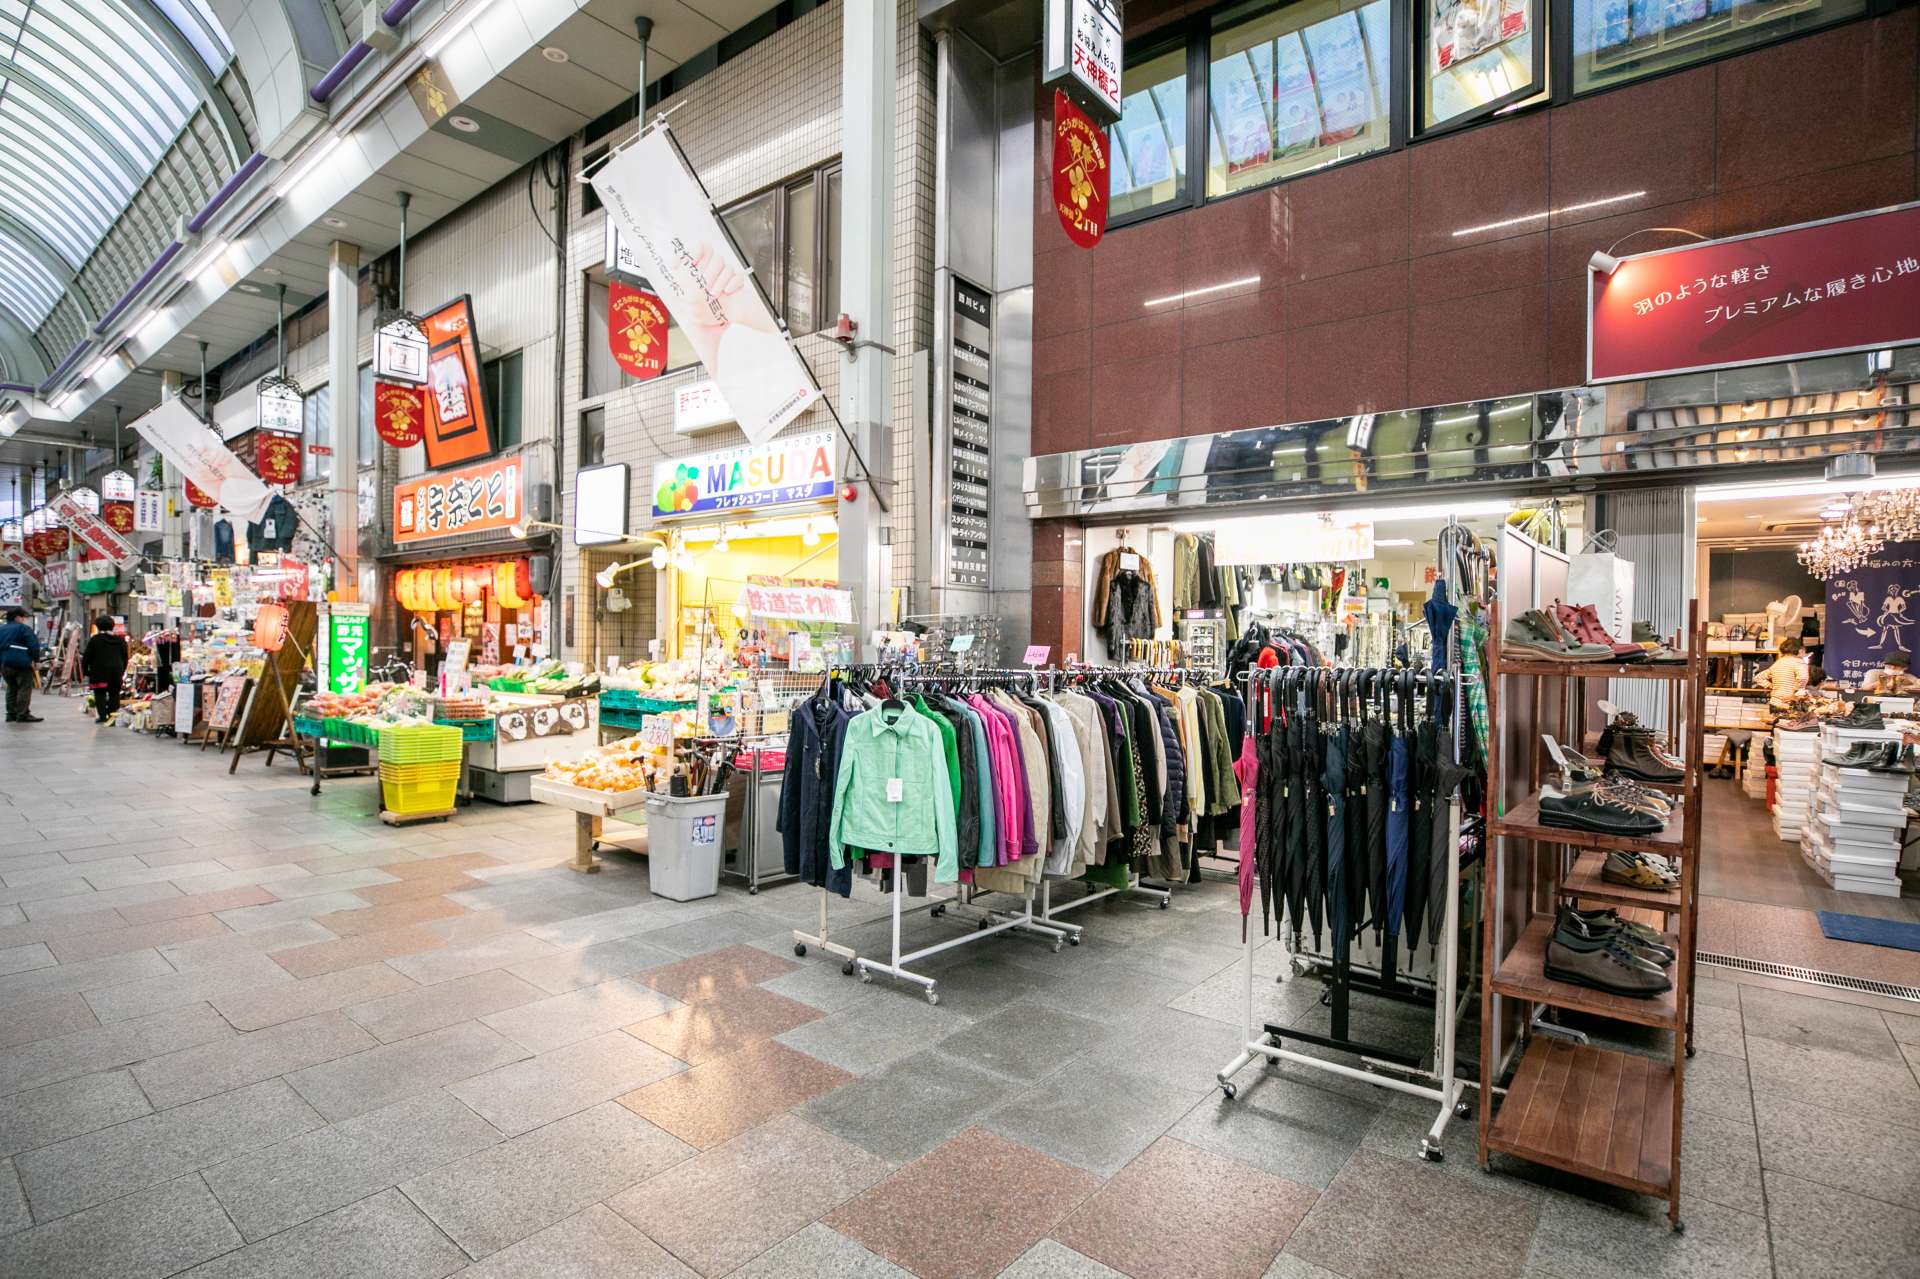 A wide variety of stores dedicated to clothing, food, and household essentials.